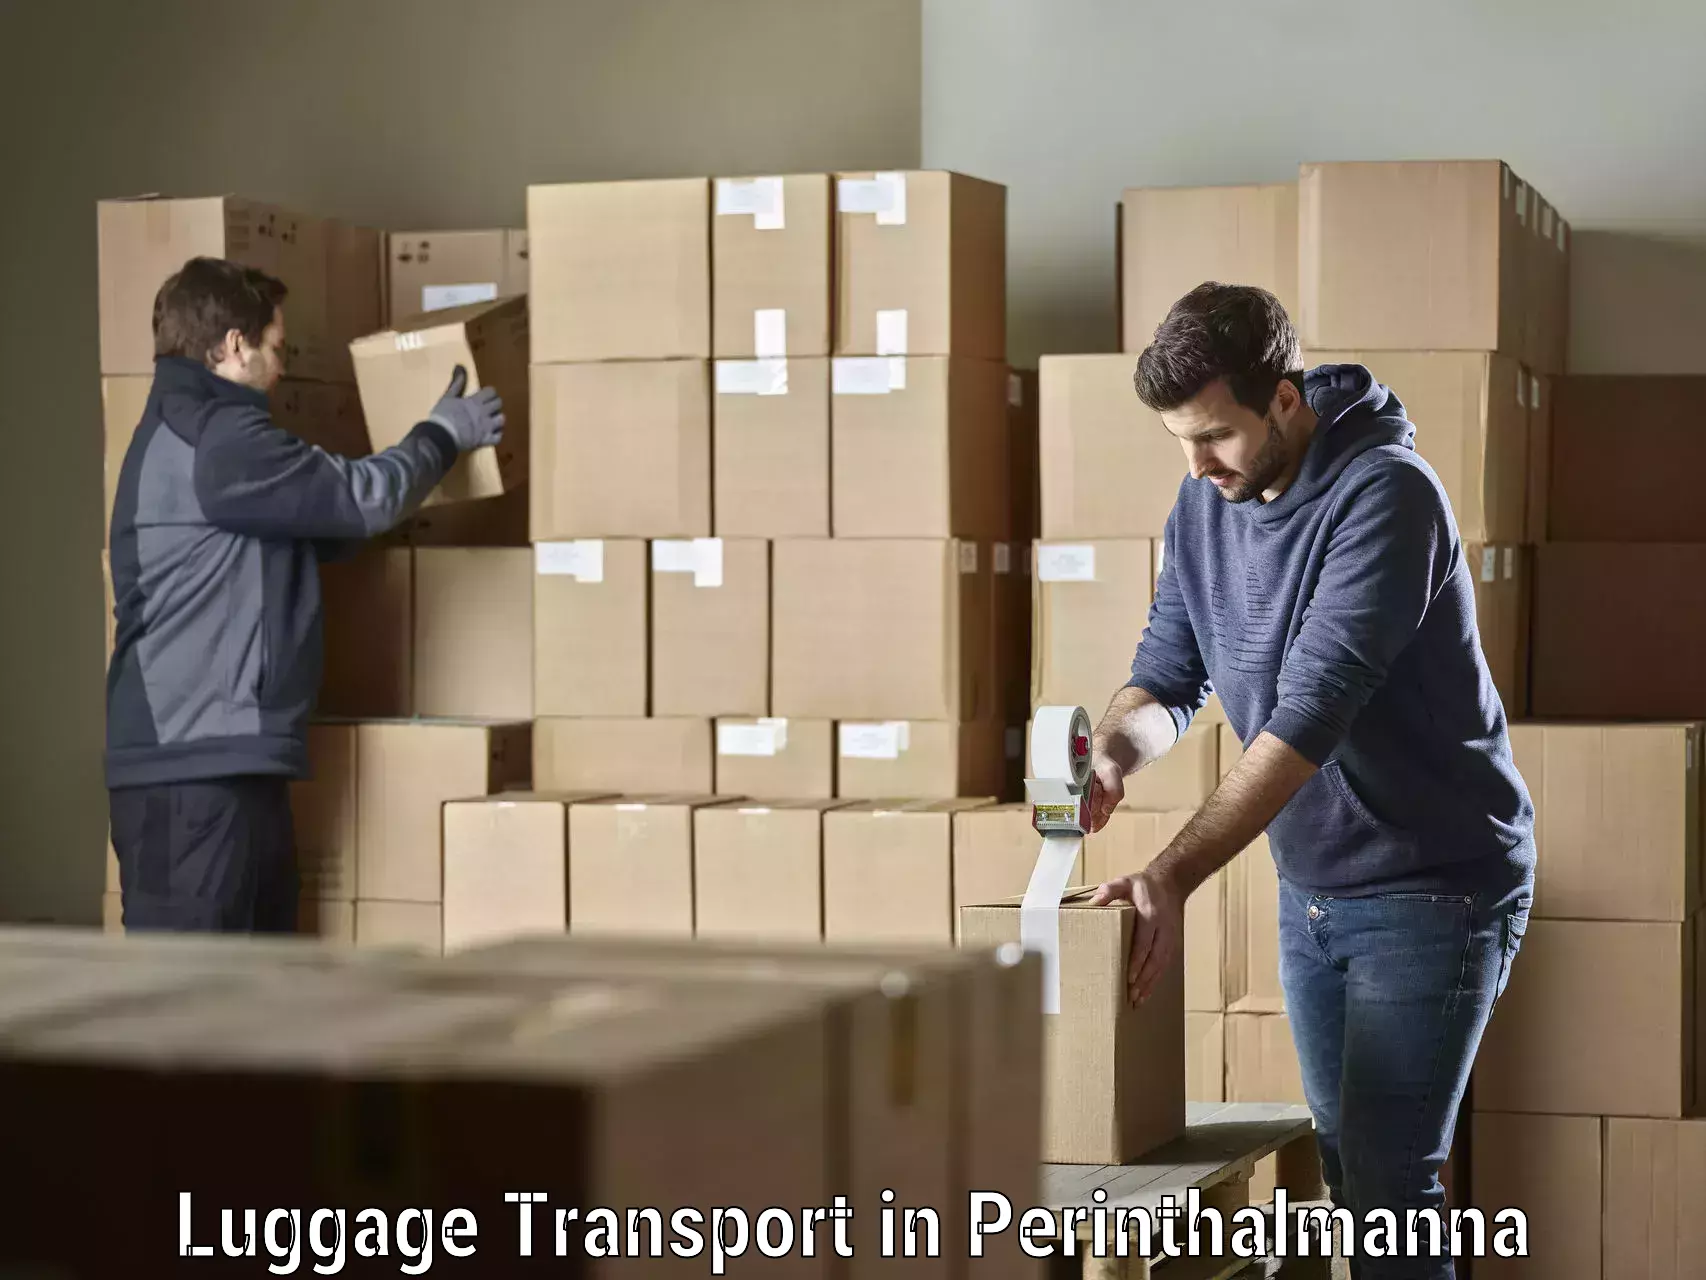 Baggage transport professionals in Perinthalmanna